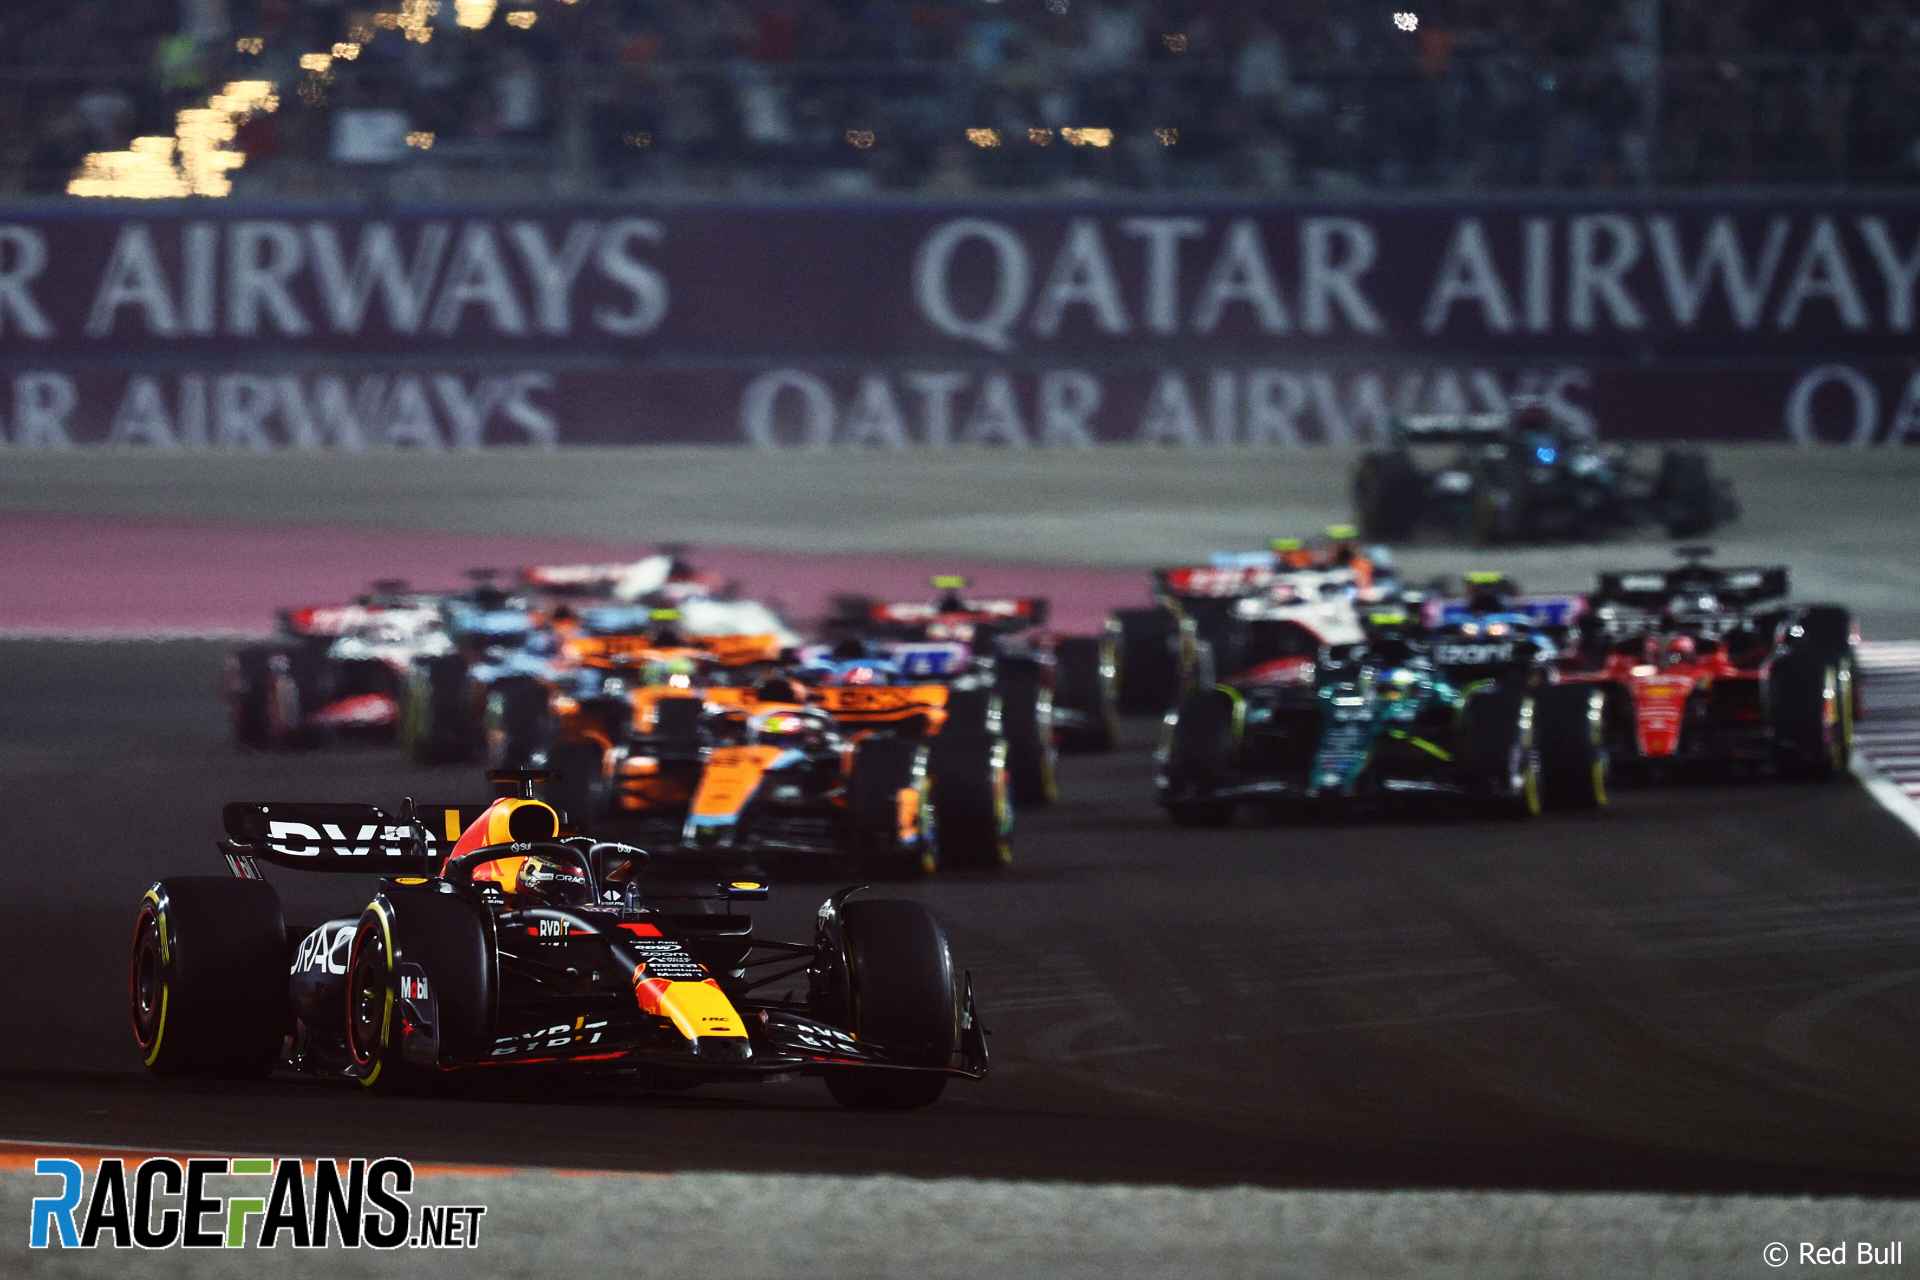 The 2023 Qatar Grand Prix was held at Losail International Circuit and won by Max Verstappen